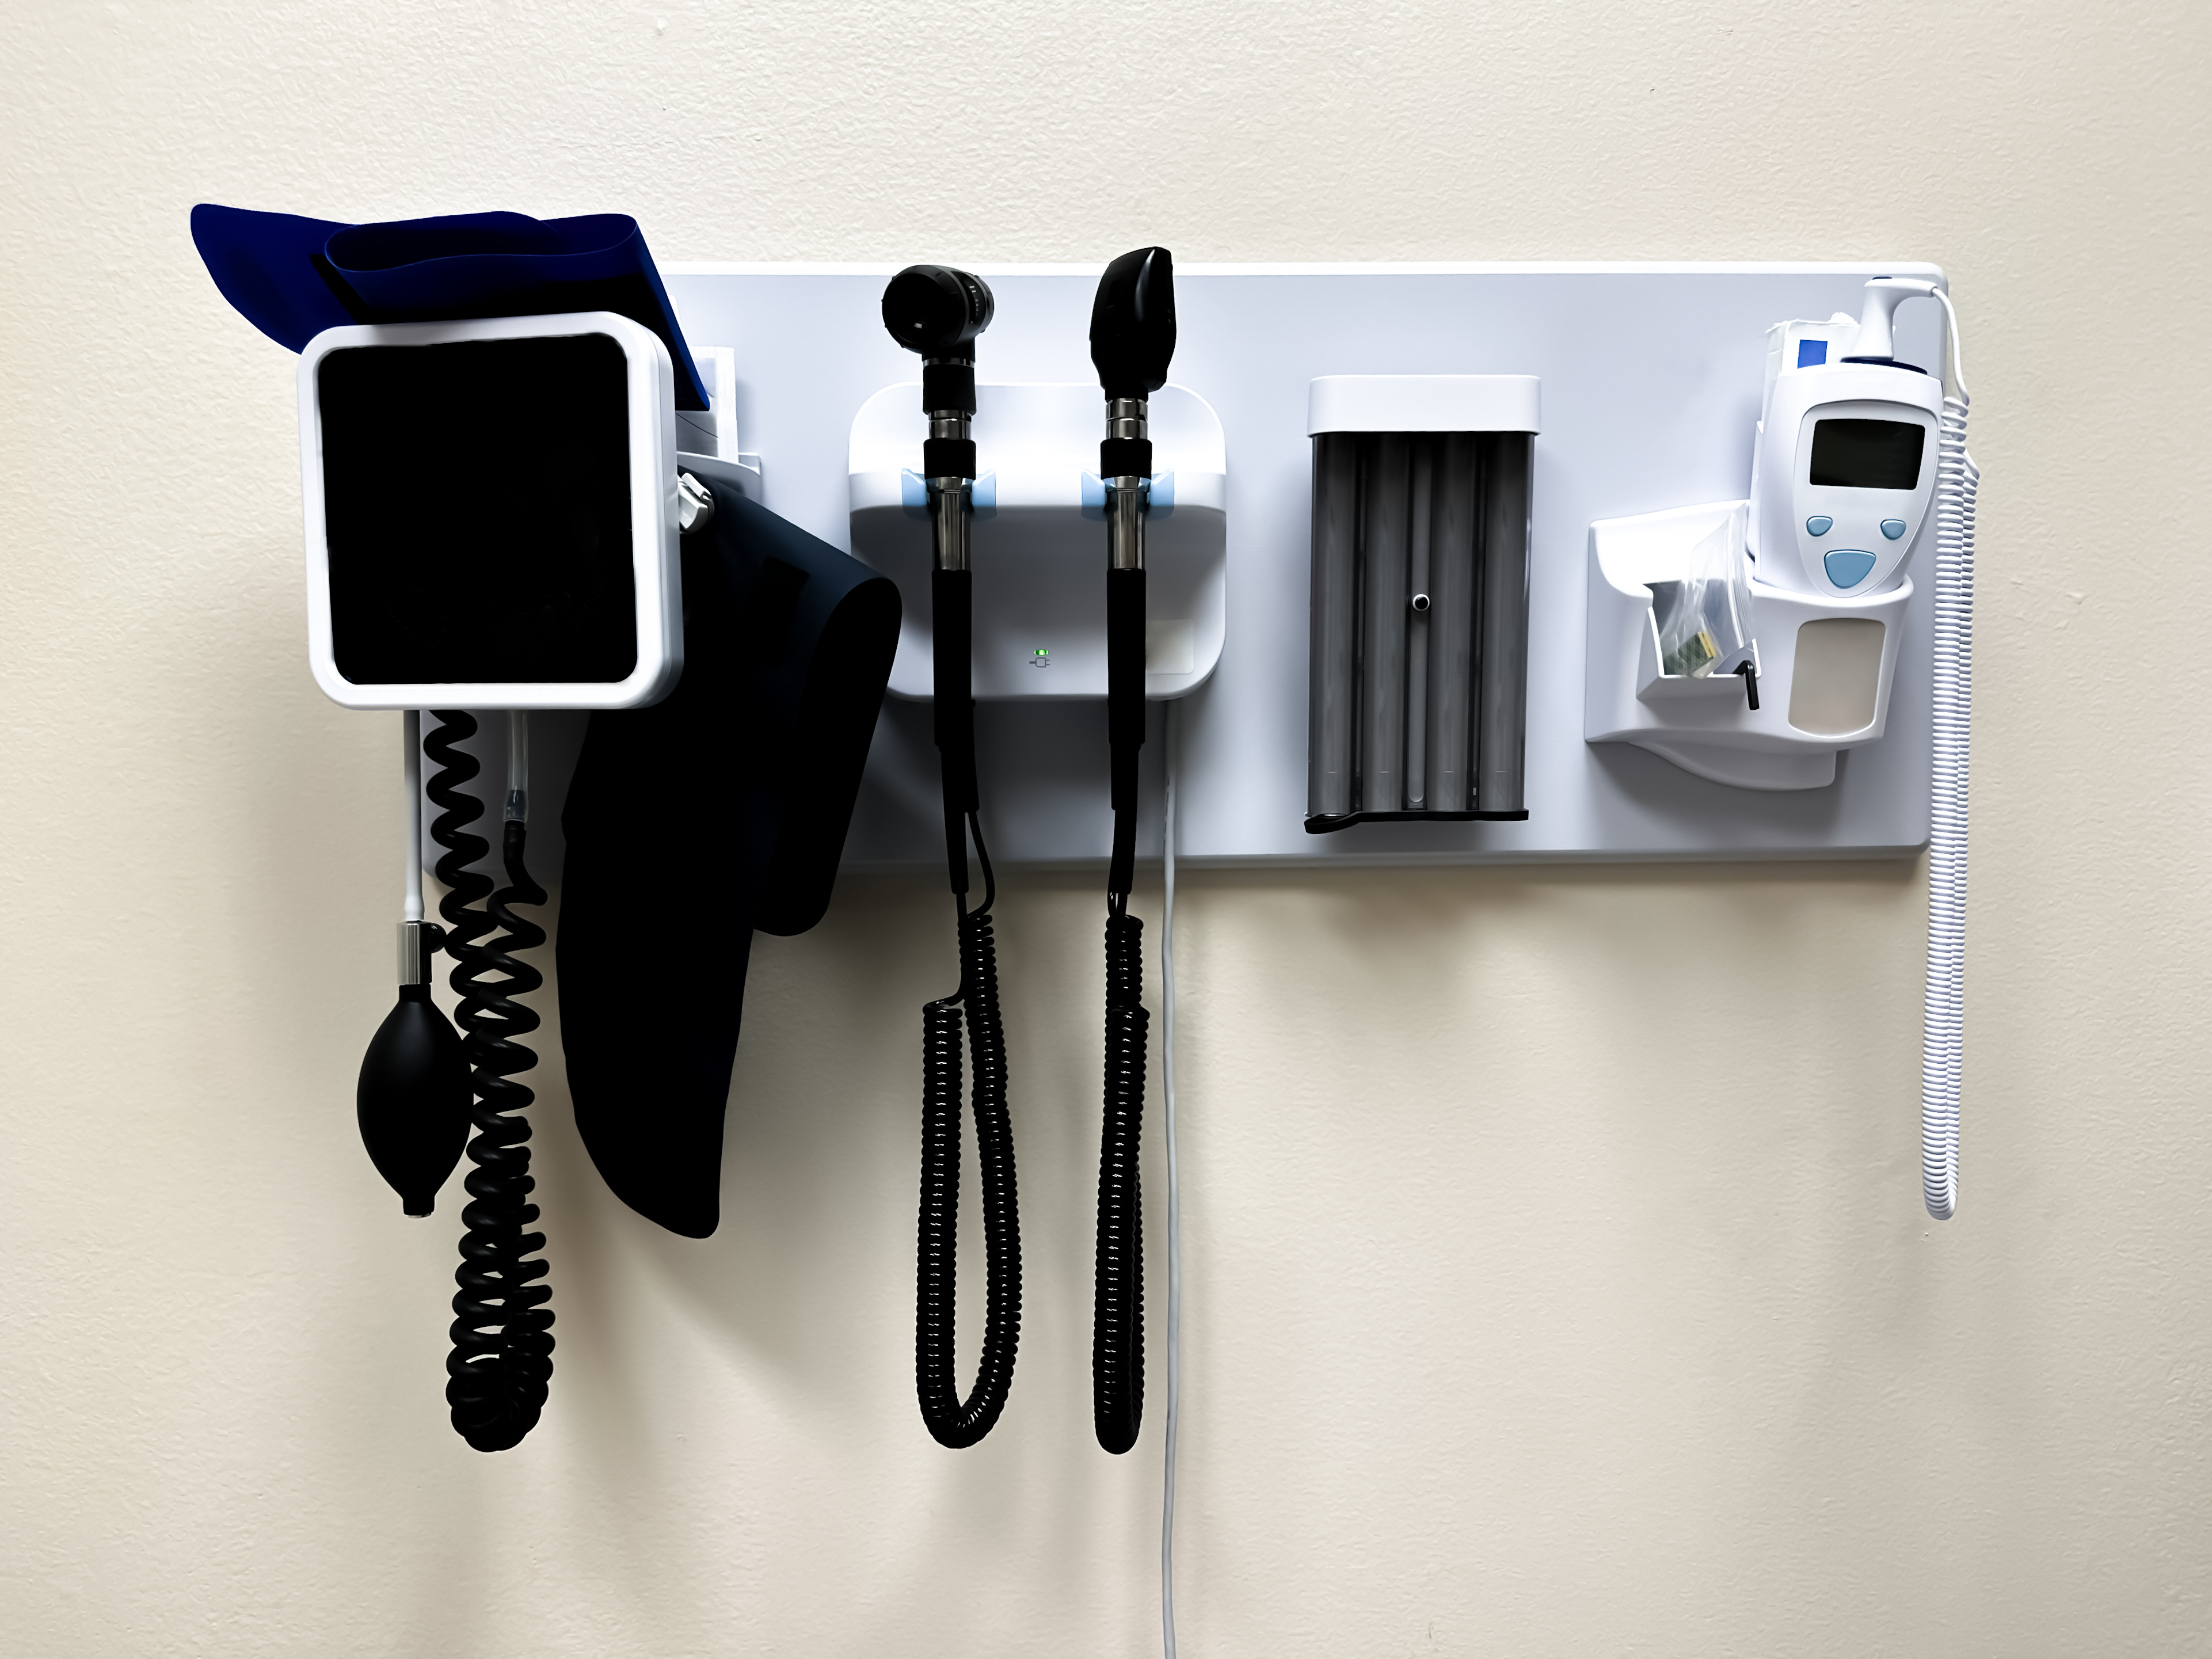 wall-mounted panel of medical diagnostic equipment in standard patient examination room